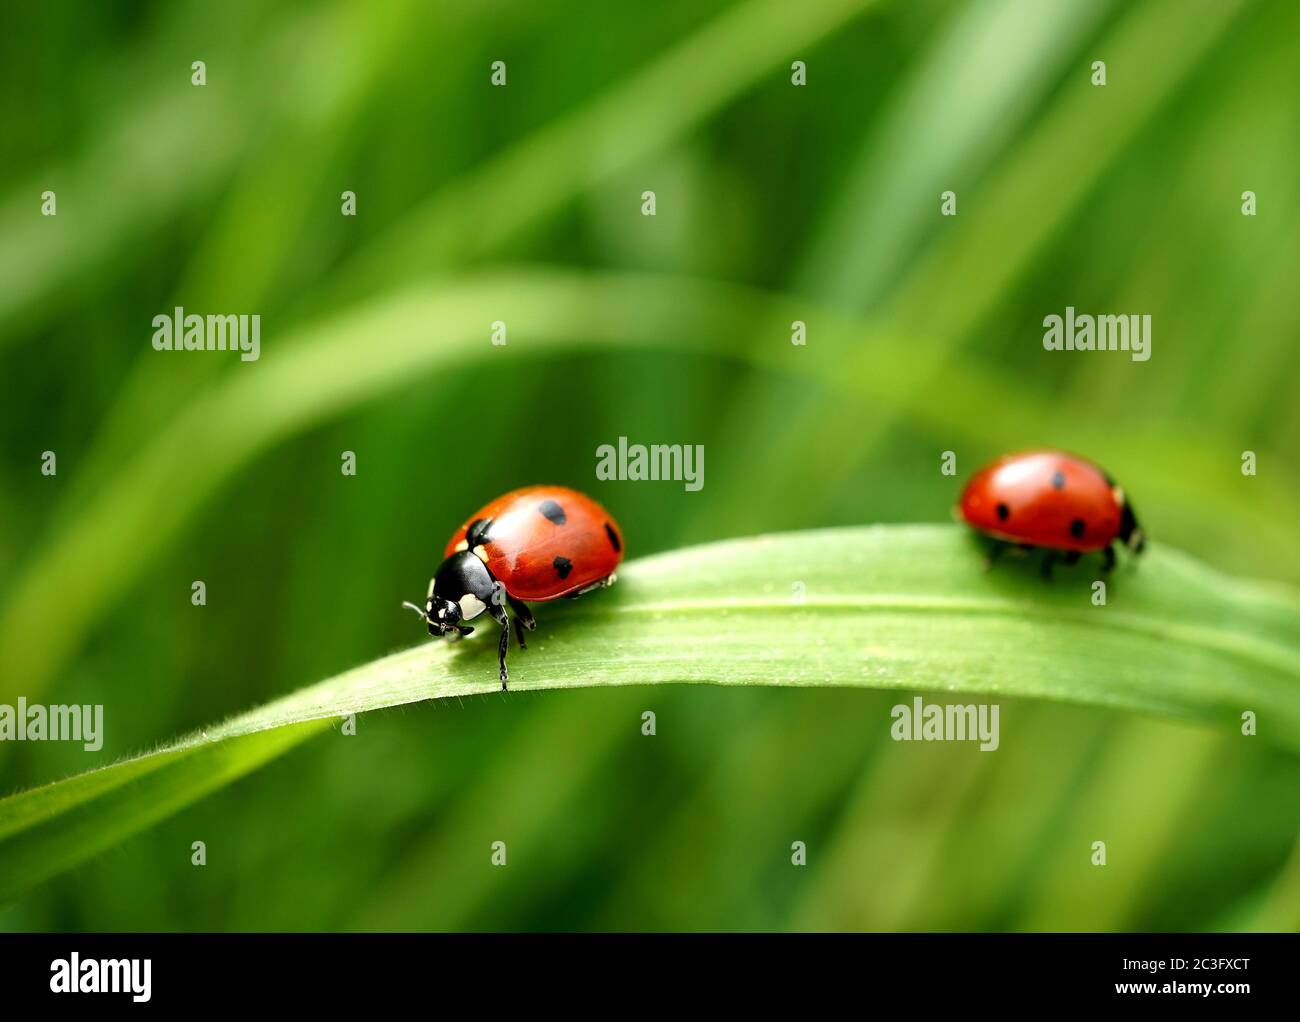 Two seven-spotted ladybugs on a blade of grass Stock Photo